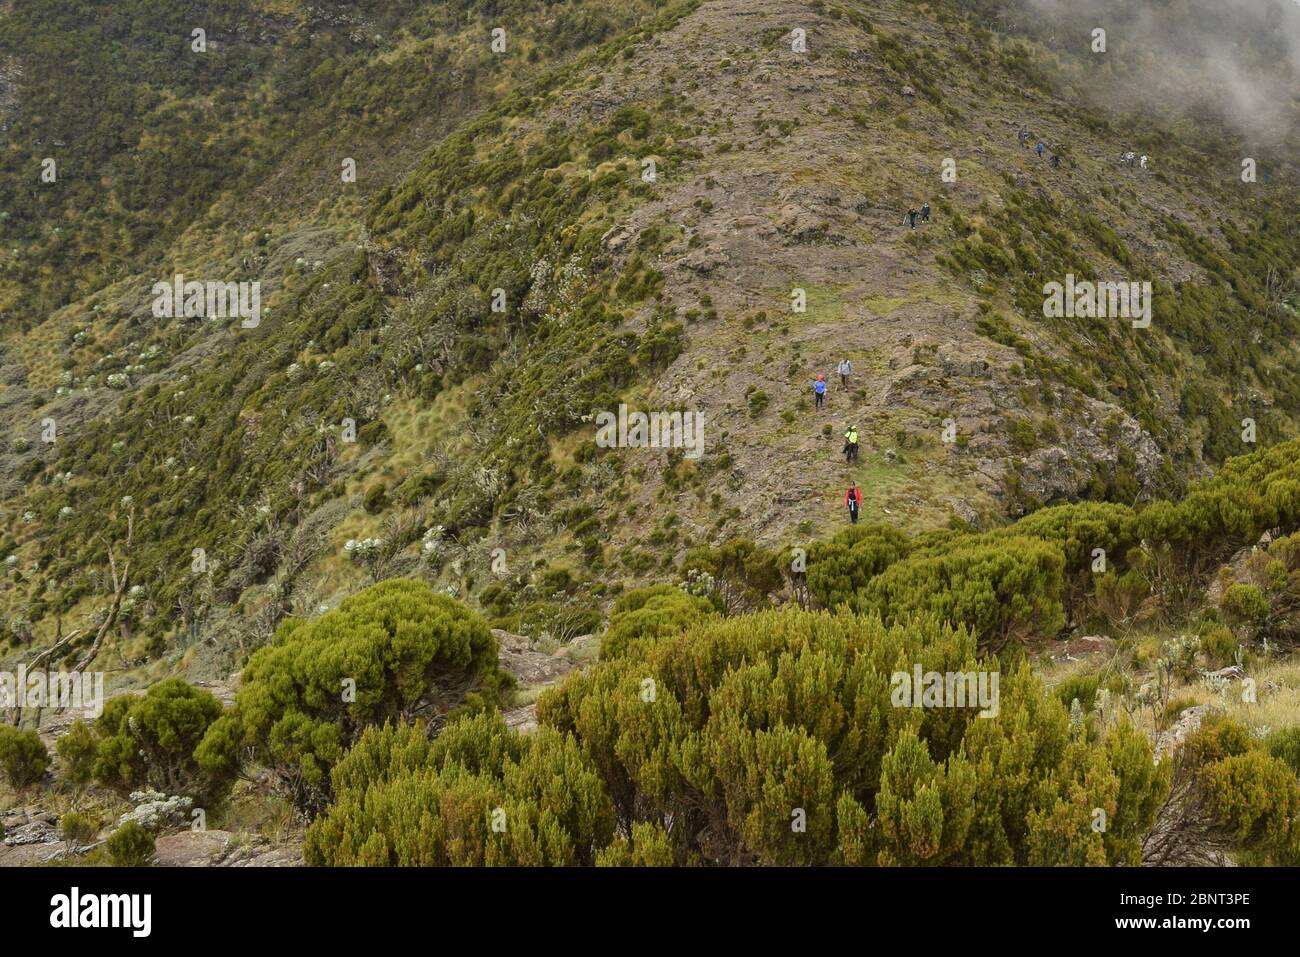 Aerial view of hikers against mountain, Aberdare Ranges, Kenya Stock Photo